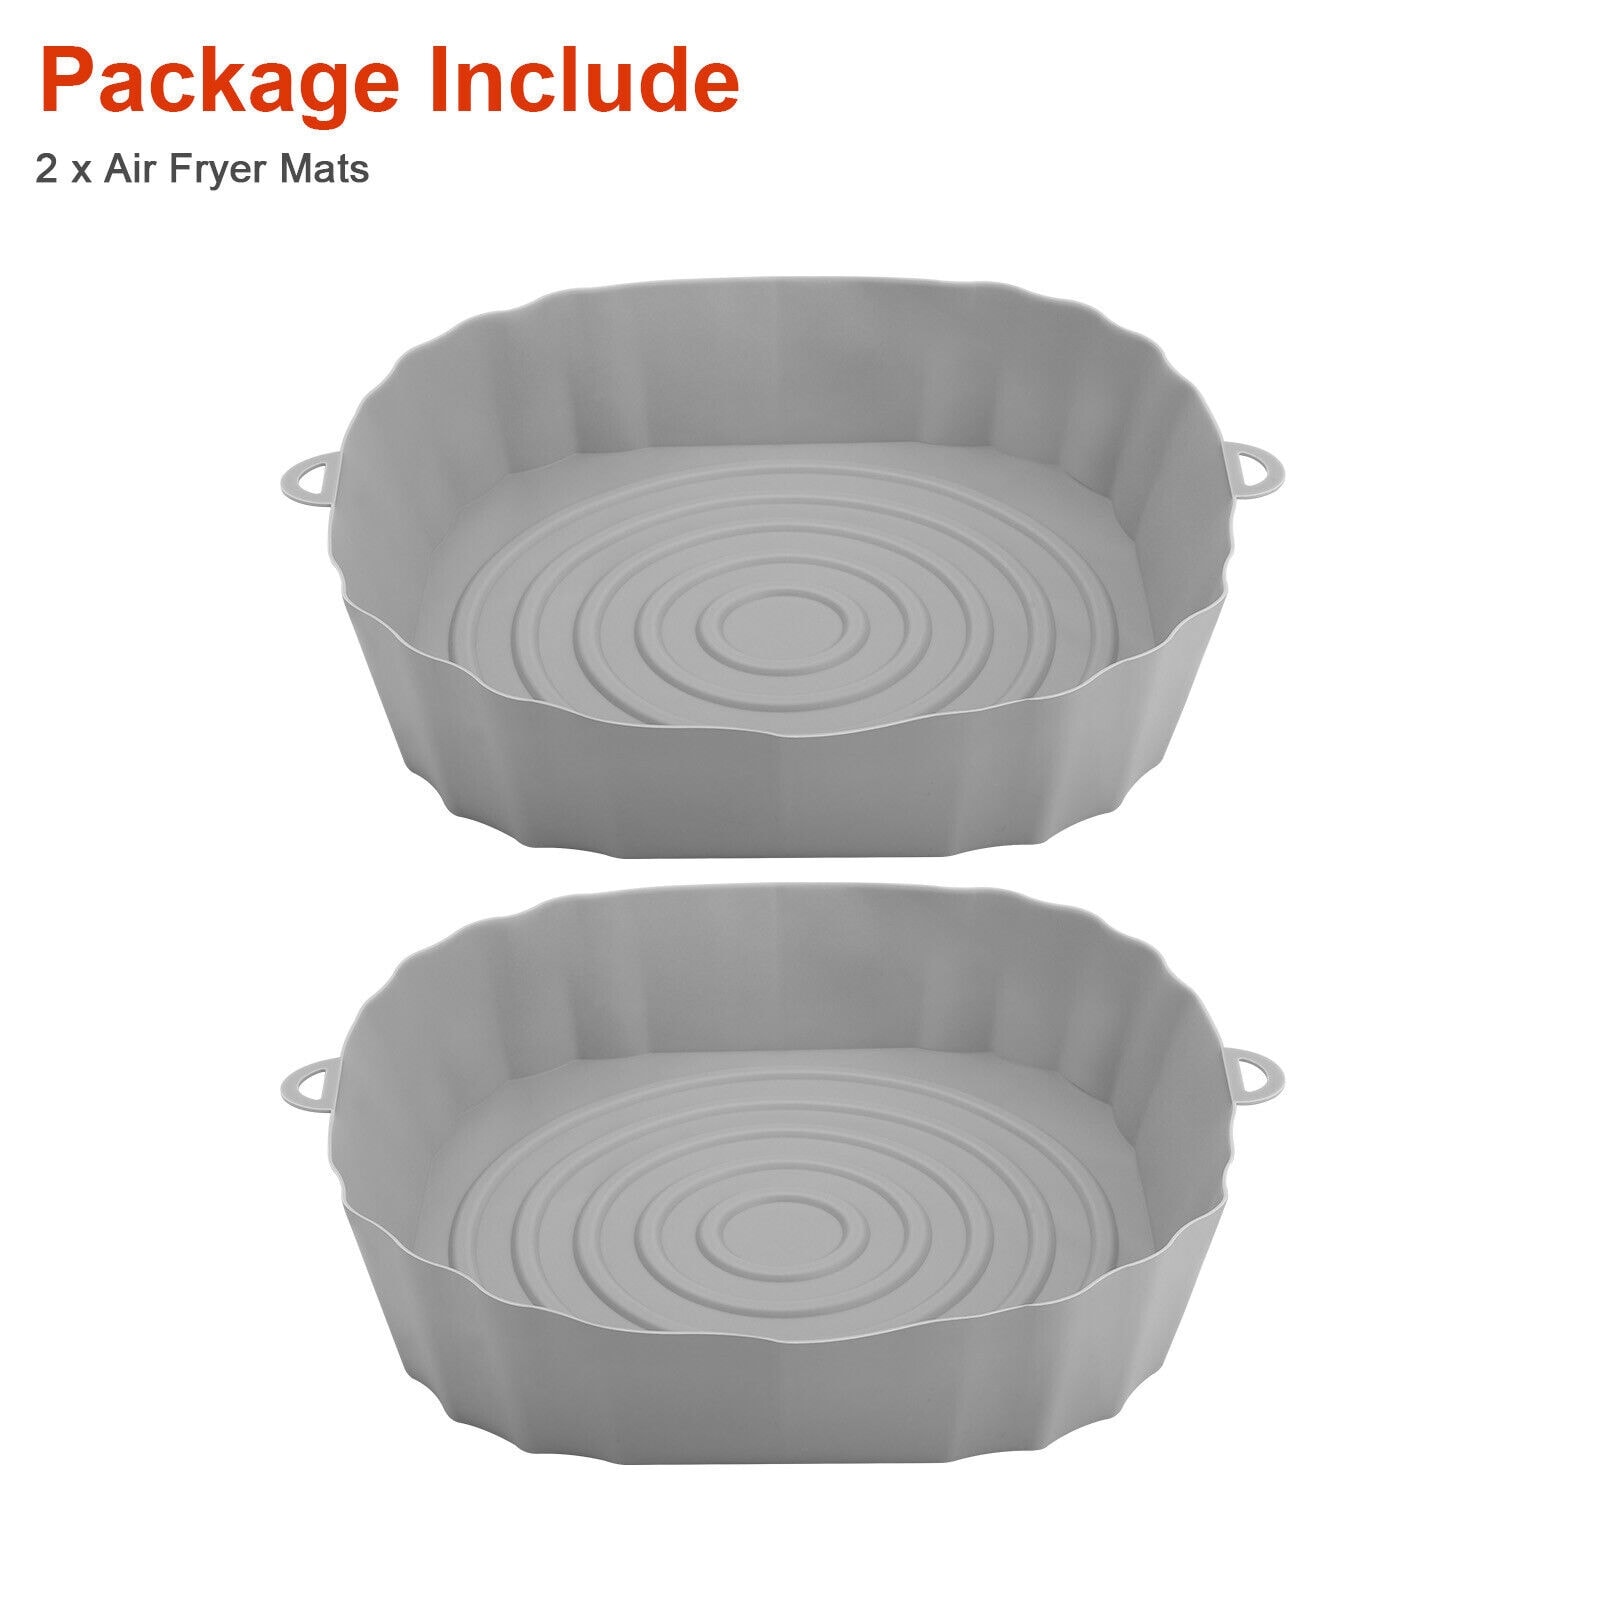 https://ak1.ostkcdn.com/images/products/is/images/direct/4934a24cbd7fc3f4af462d986e380006baa5746f/Silicone-2-Pieces-Non-stick-Oven-Baking-Tray-Mats-Air-Fryer-Liners.jpg